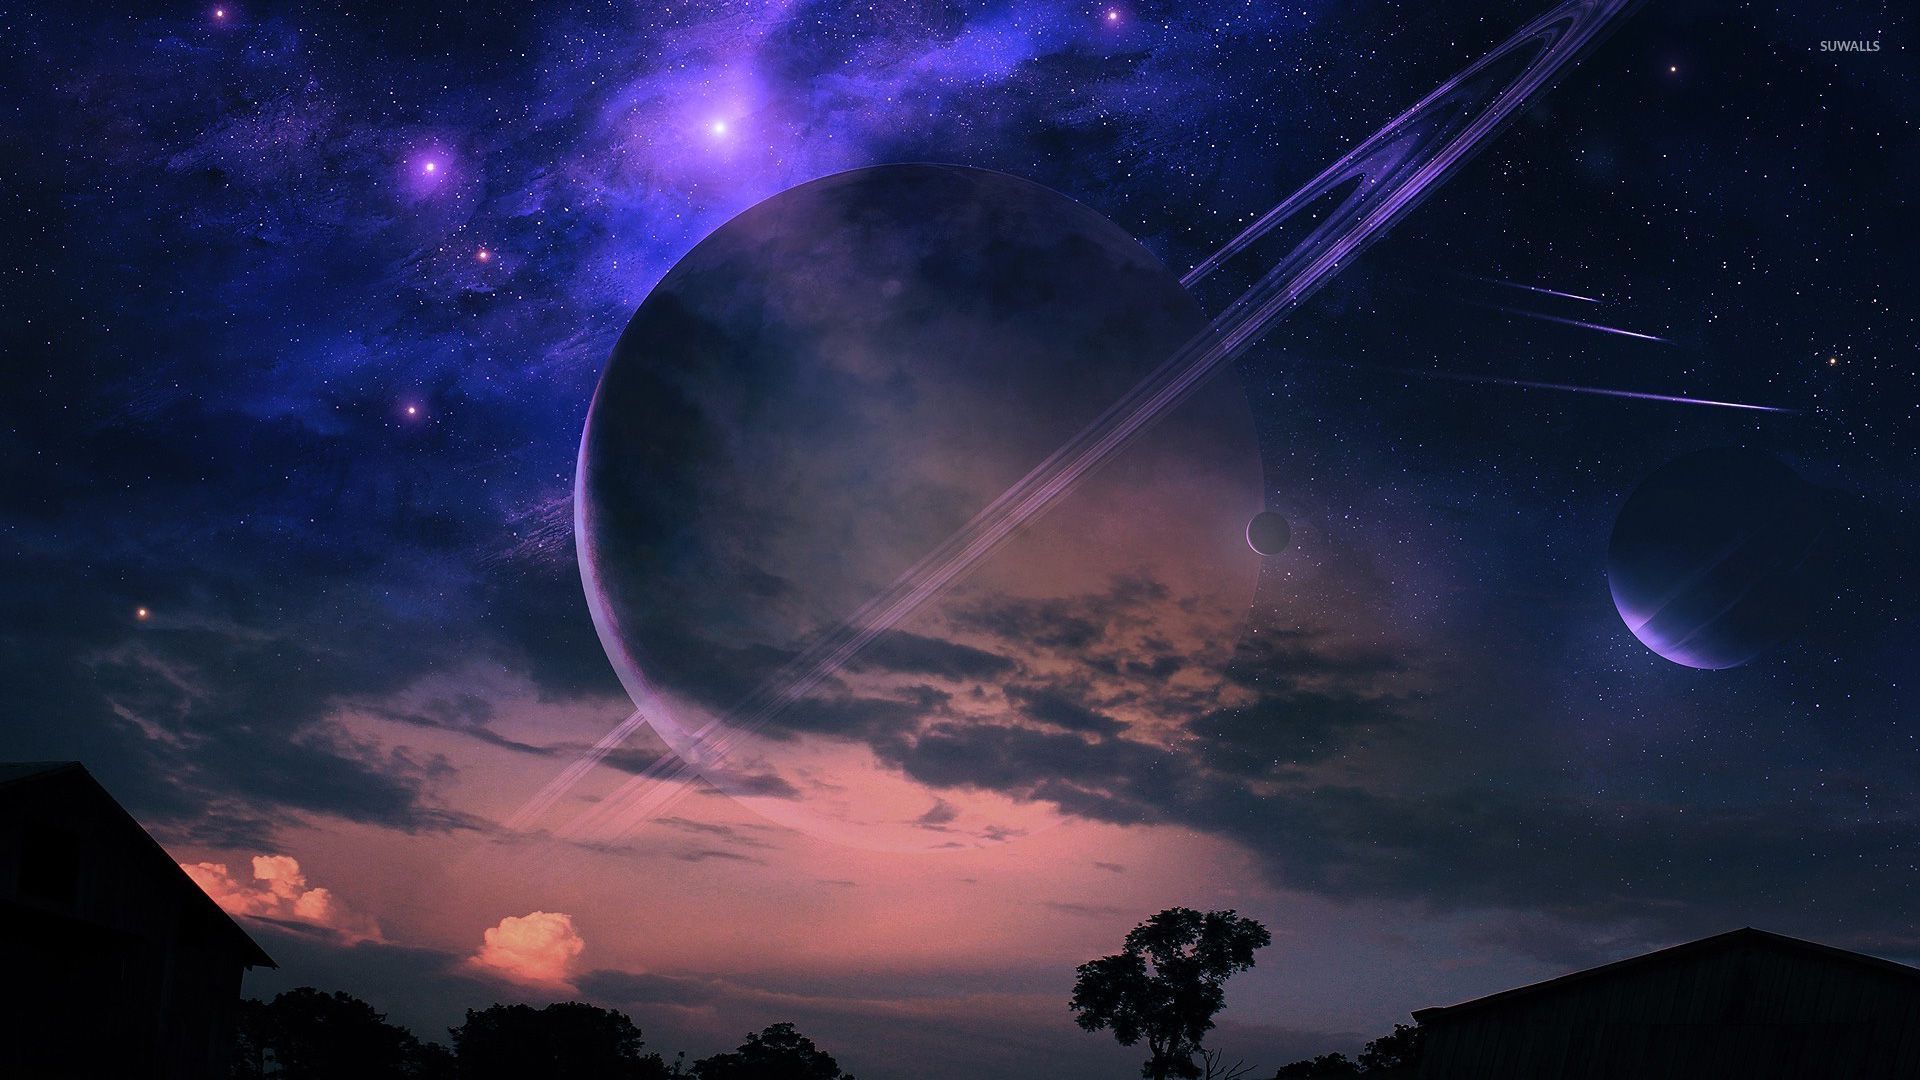 Planets In The Night Sky Wallpaper - Night Sky With Planets , HD Wallpaper & Backgrounds